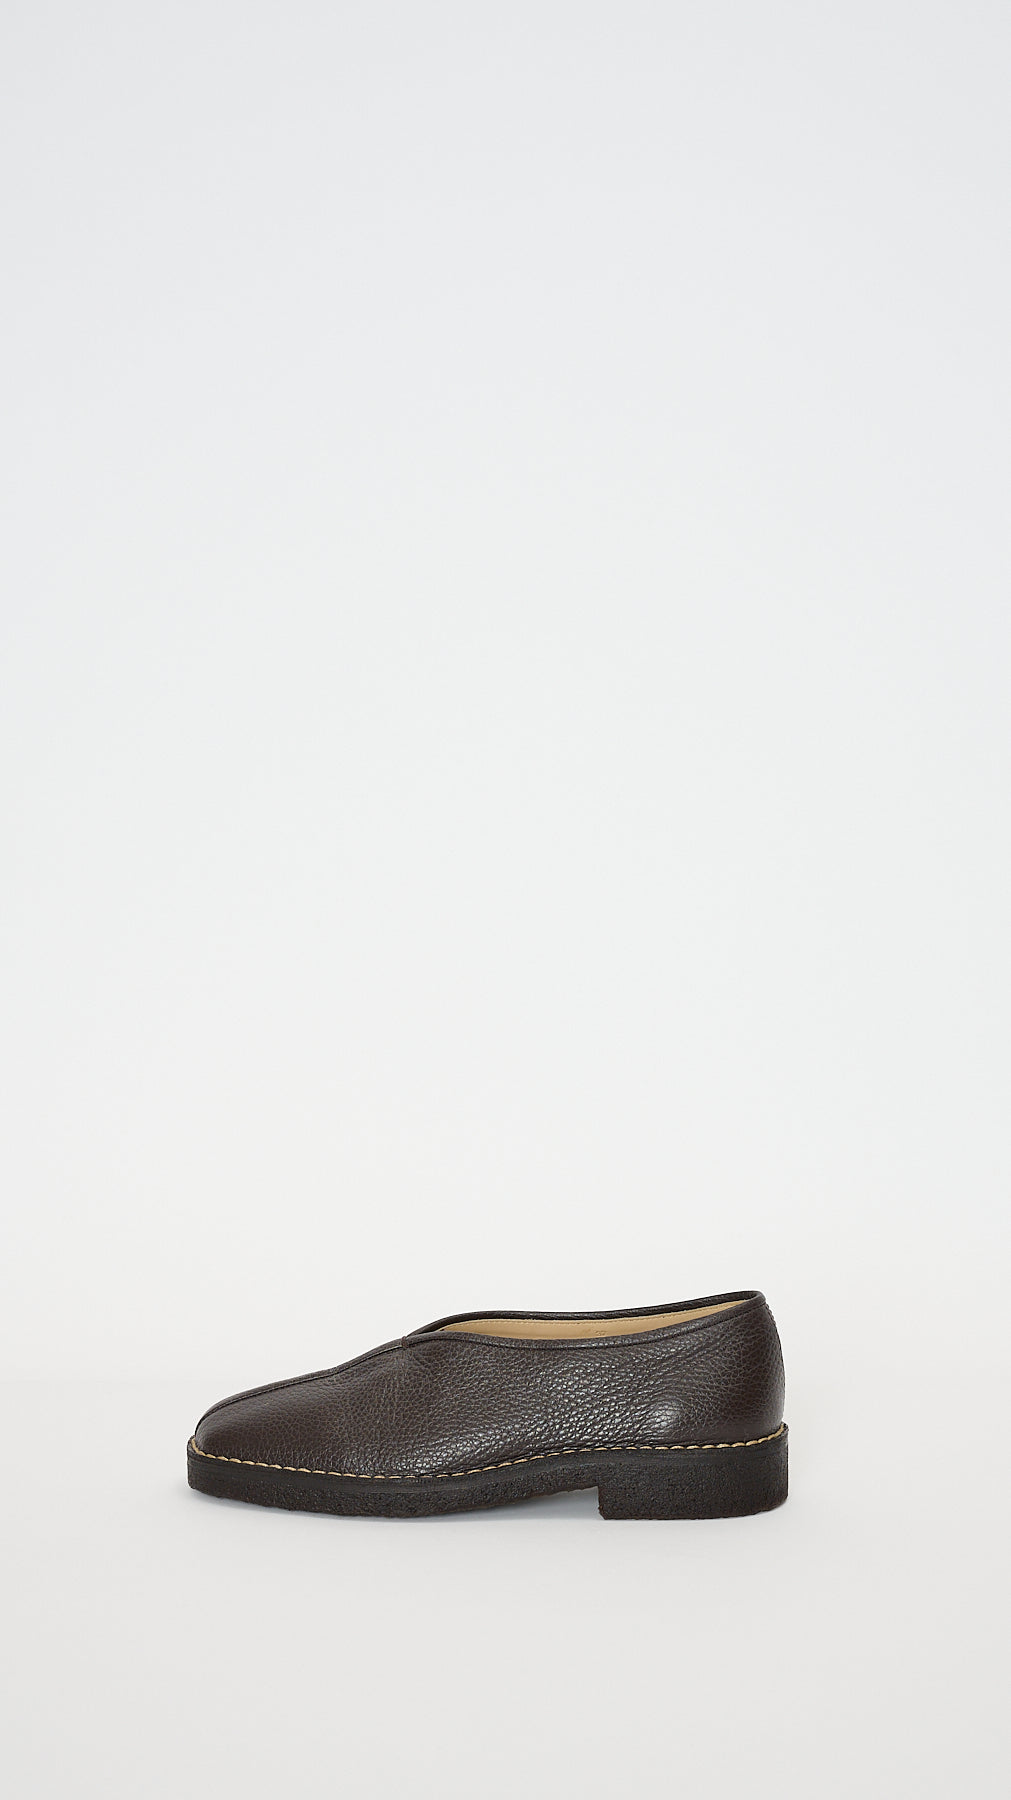 Lemaire Piped Crepe Slippers in Dark Brown